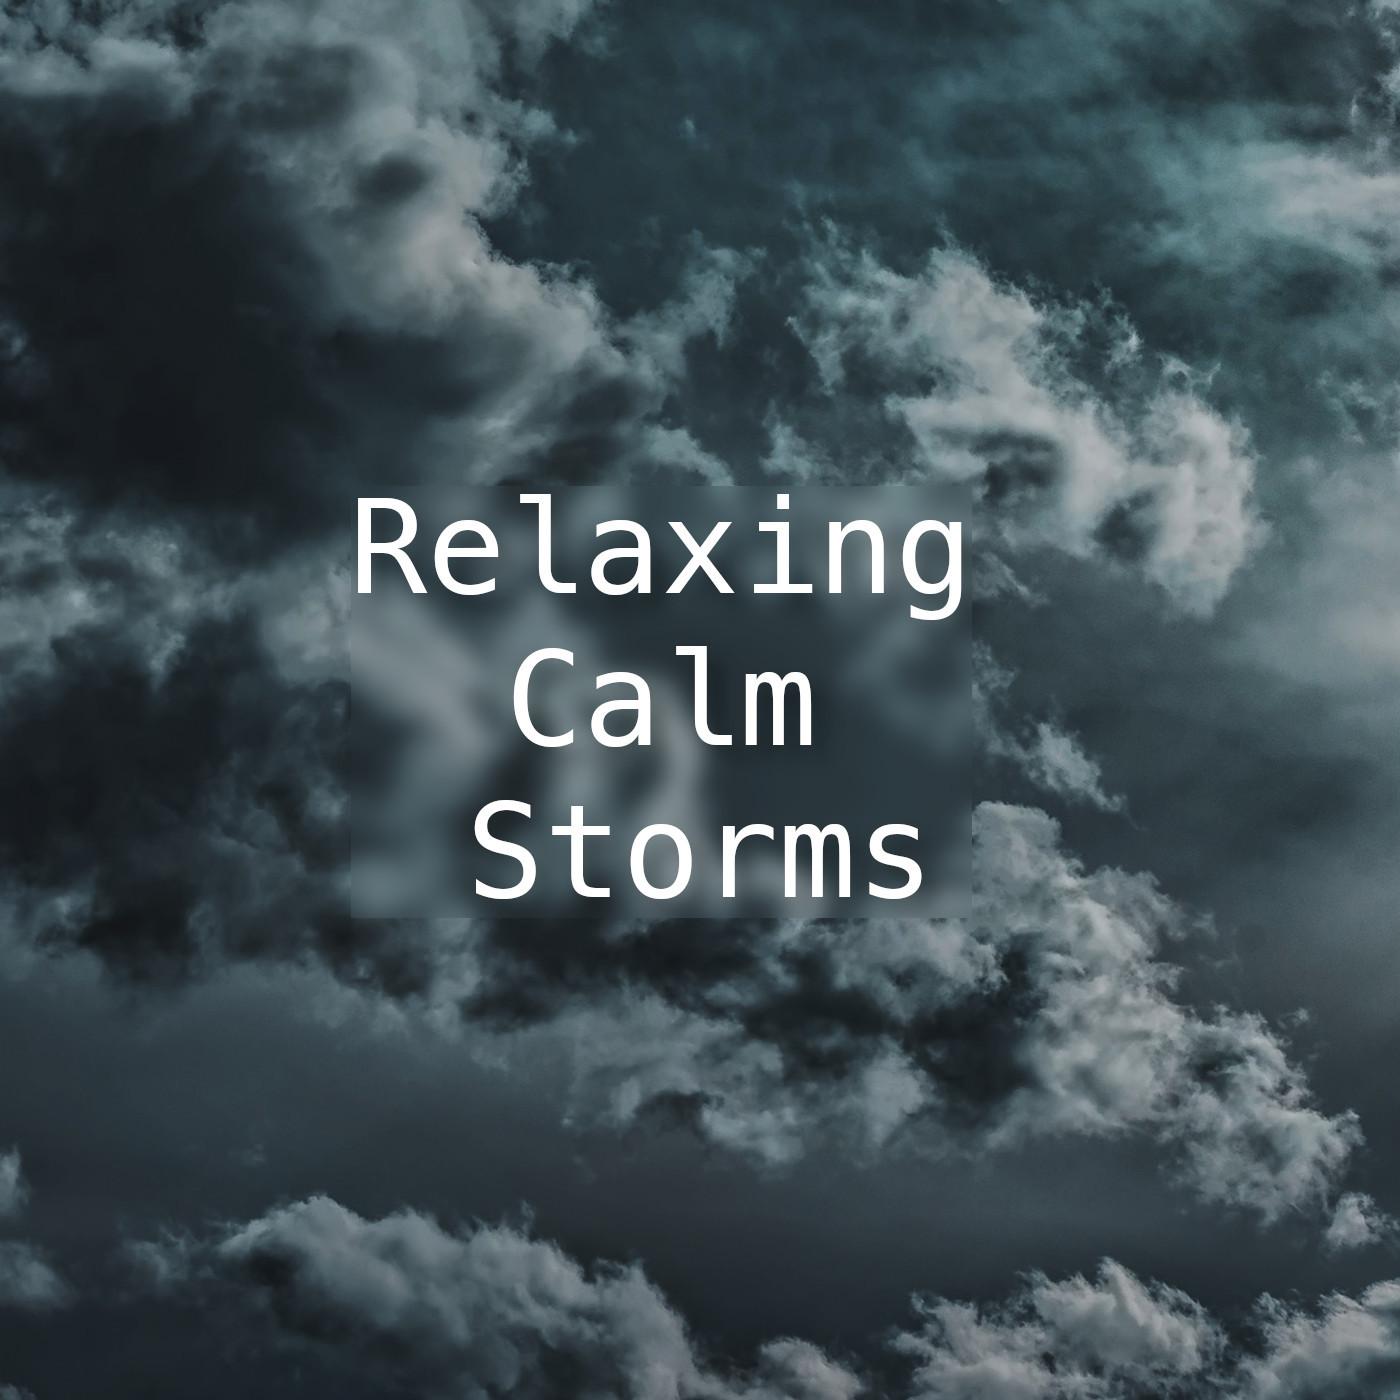 Relaxing, Calm Storms